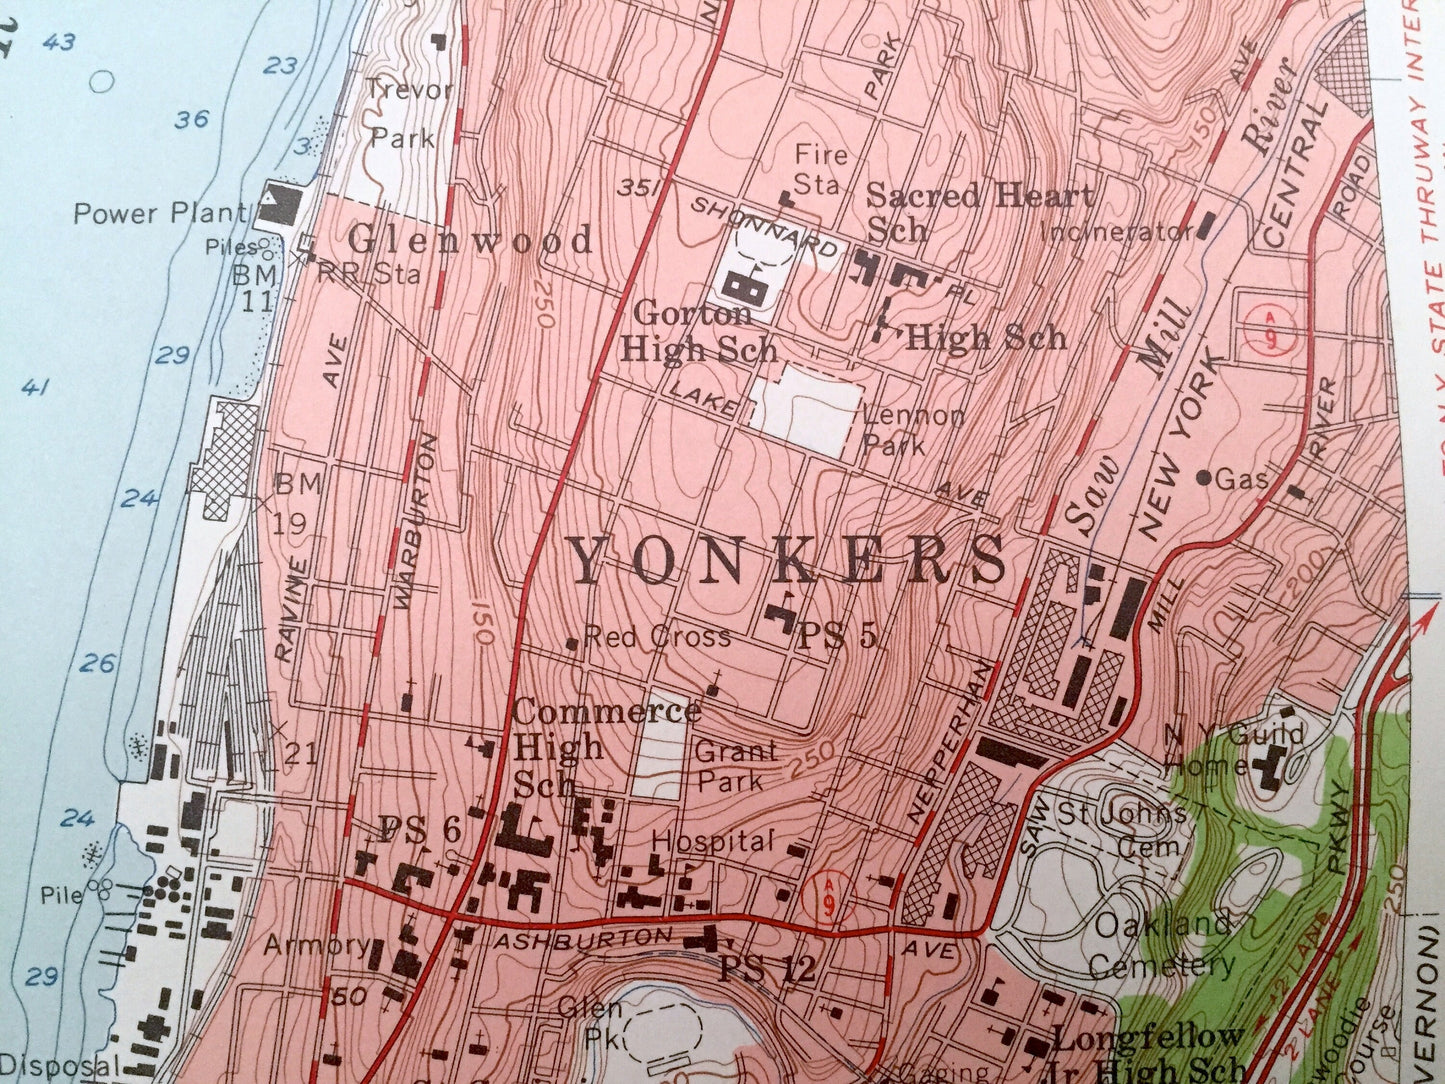 Antique Yonkers, New York 1956 US Geological Survey Topographic Map – Westchester, Bronx County, Bergen County, Bronx, Upstate, New Jersey